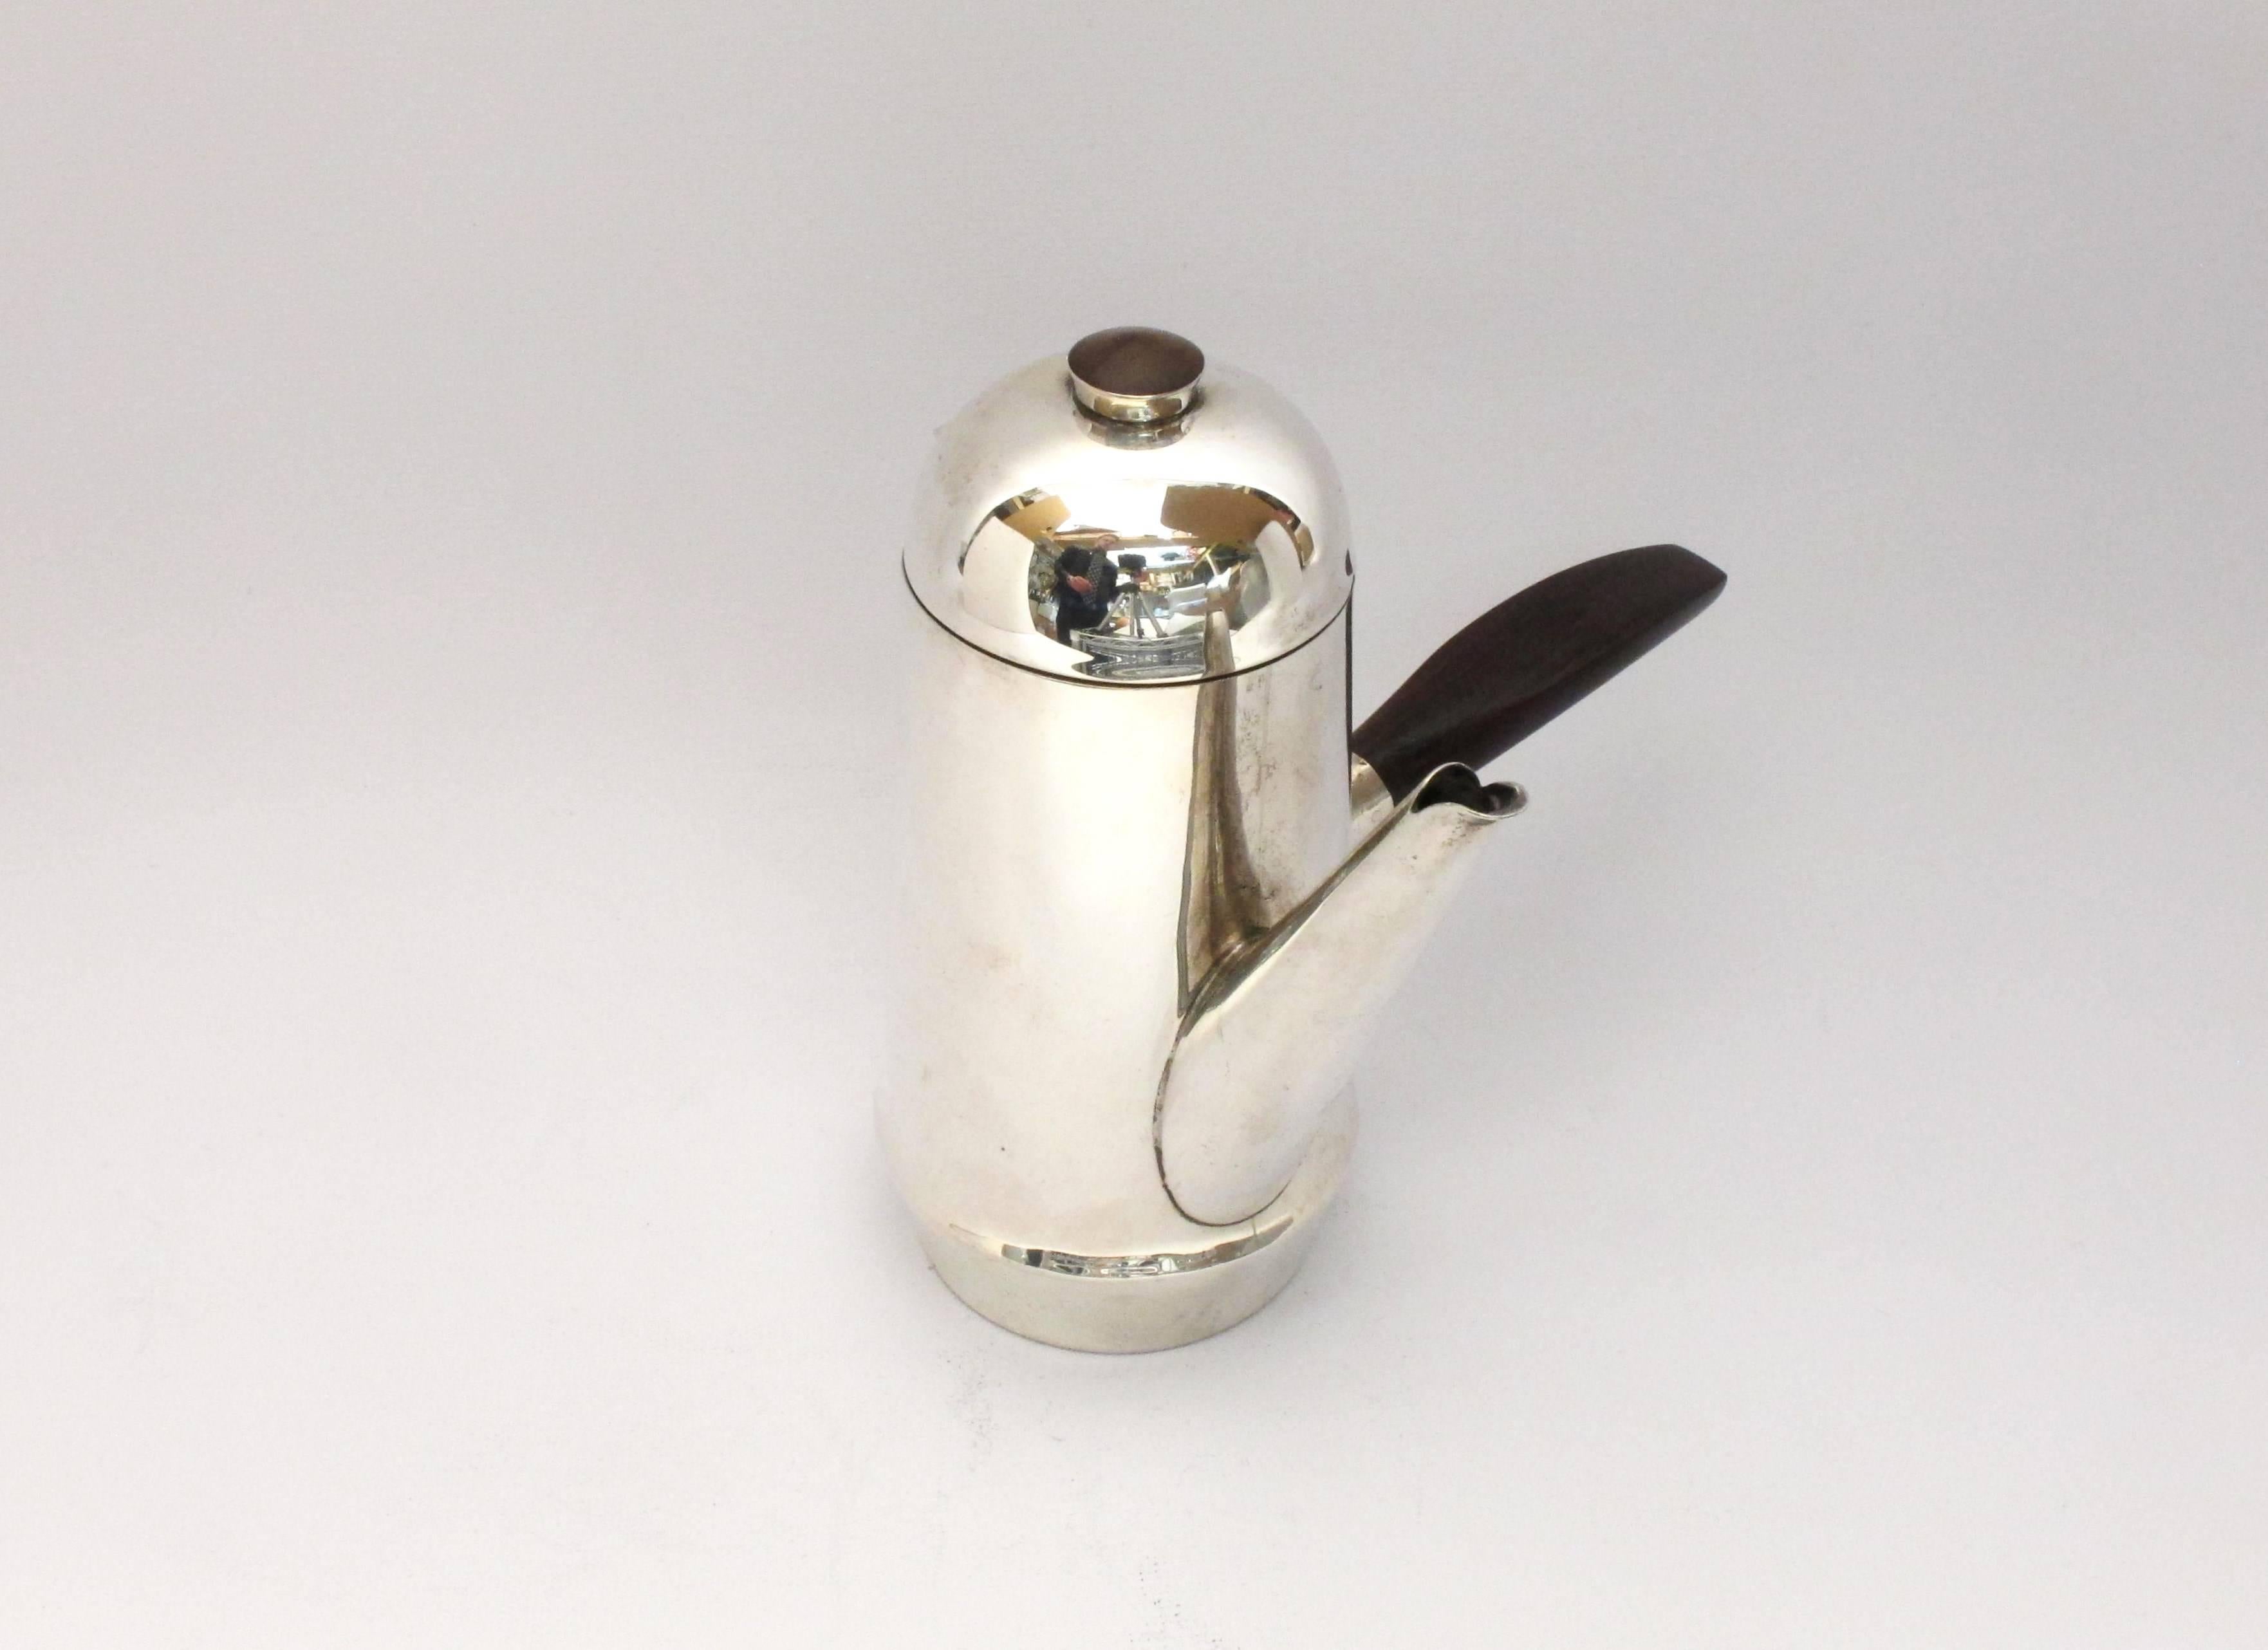 Stunning art deco sterling silver espresso pot by WIlliam Spratling 1964-1967. Handmade with rosewood handle and finial. 

7